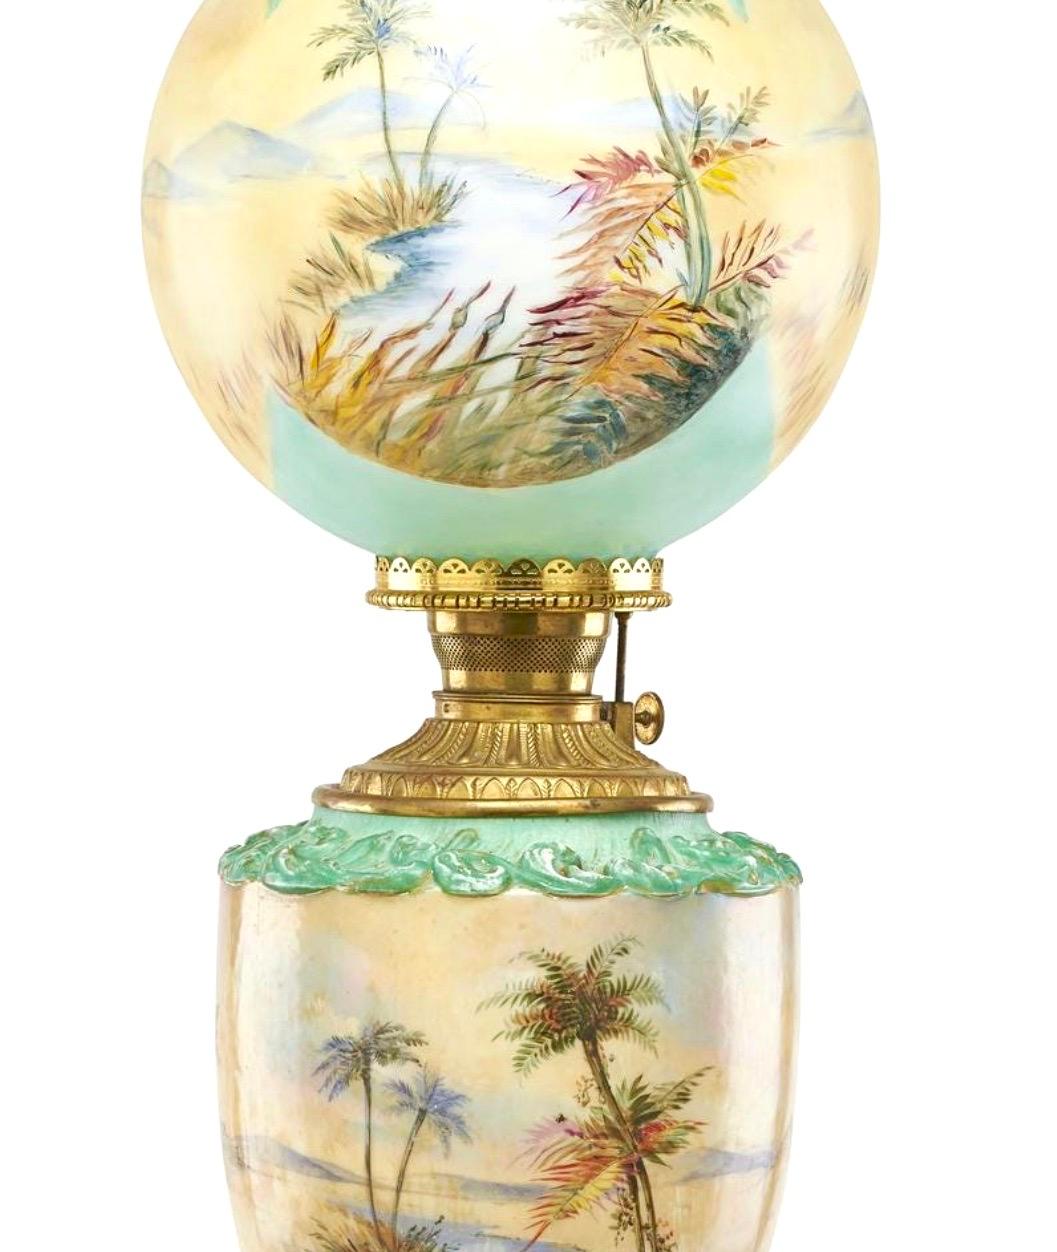 Art Deco Pairpoint Monumental Hand-Painted Orientalist Oil Lamp, Pyramids, Palms c 1905 For Sale